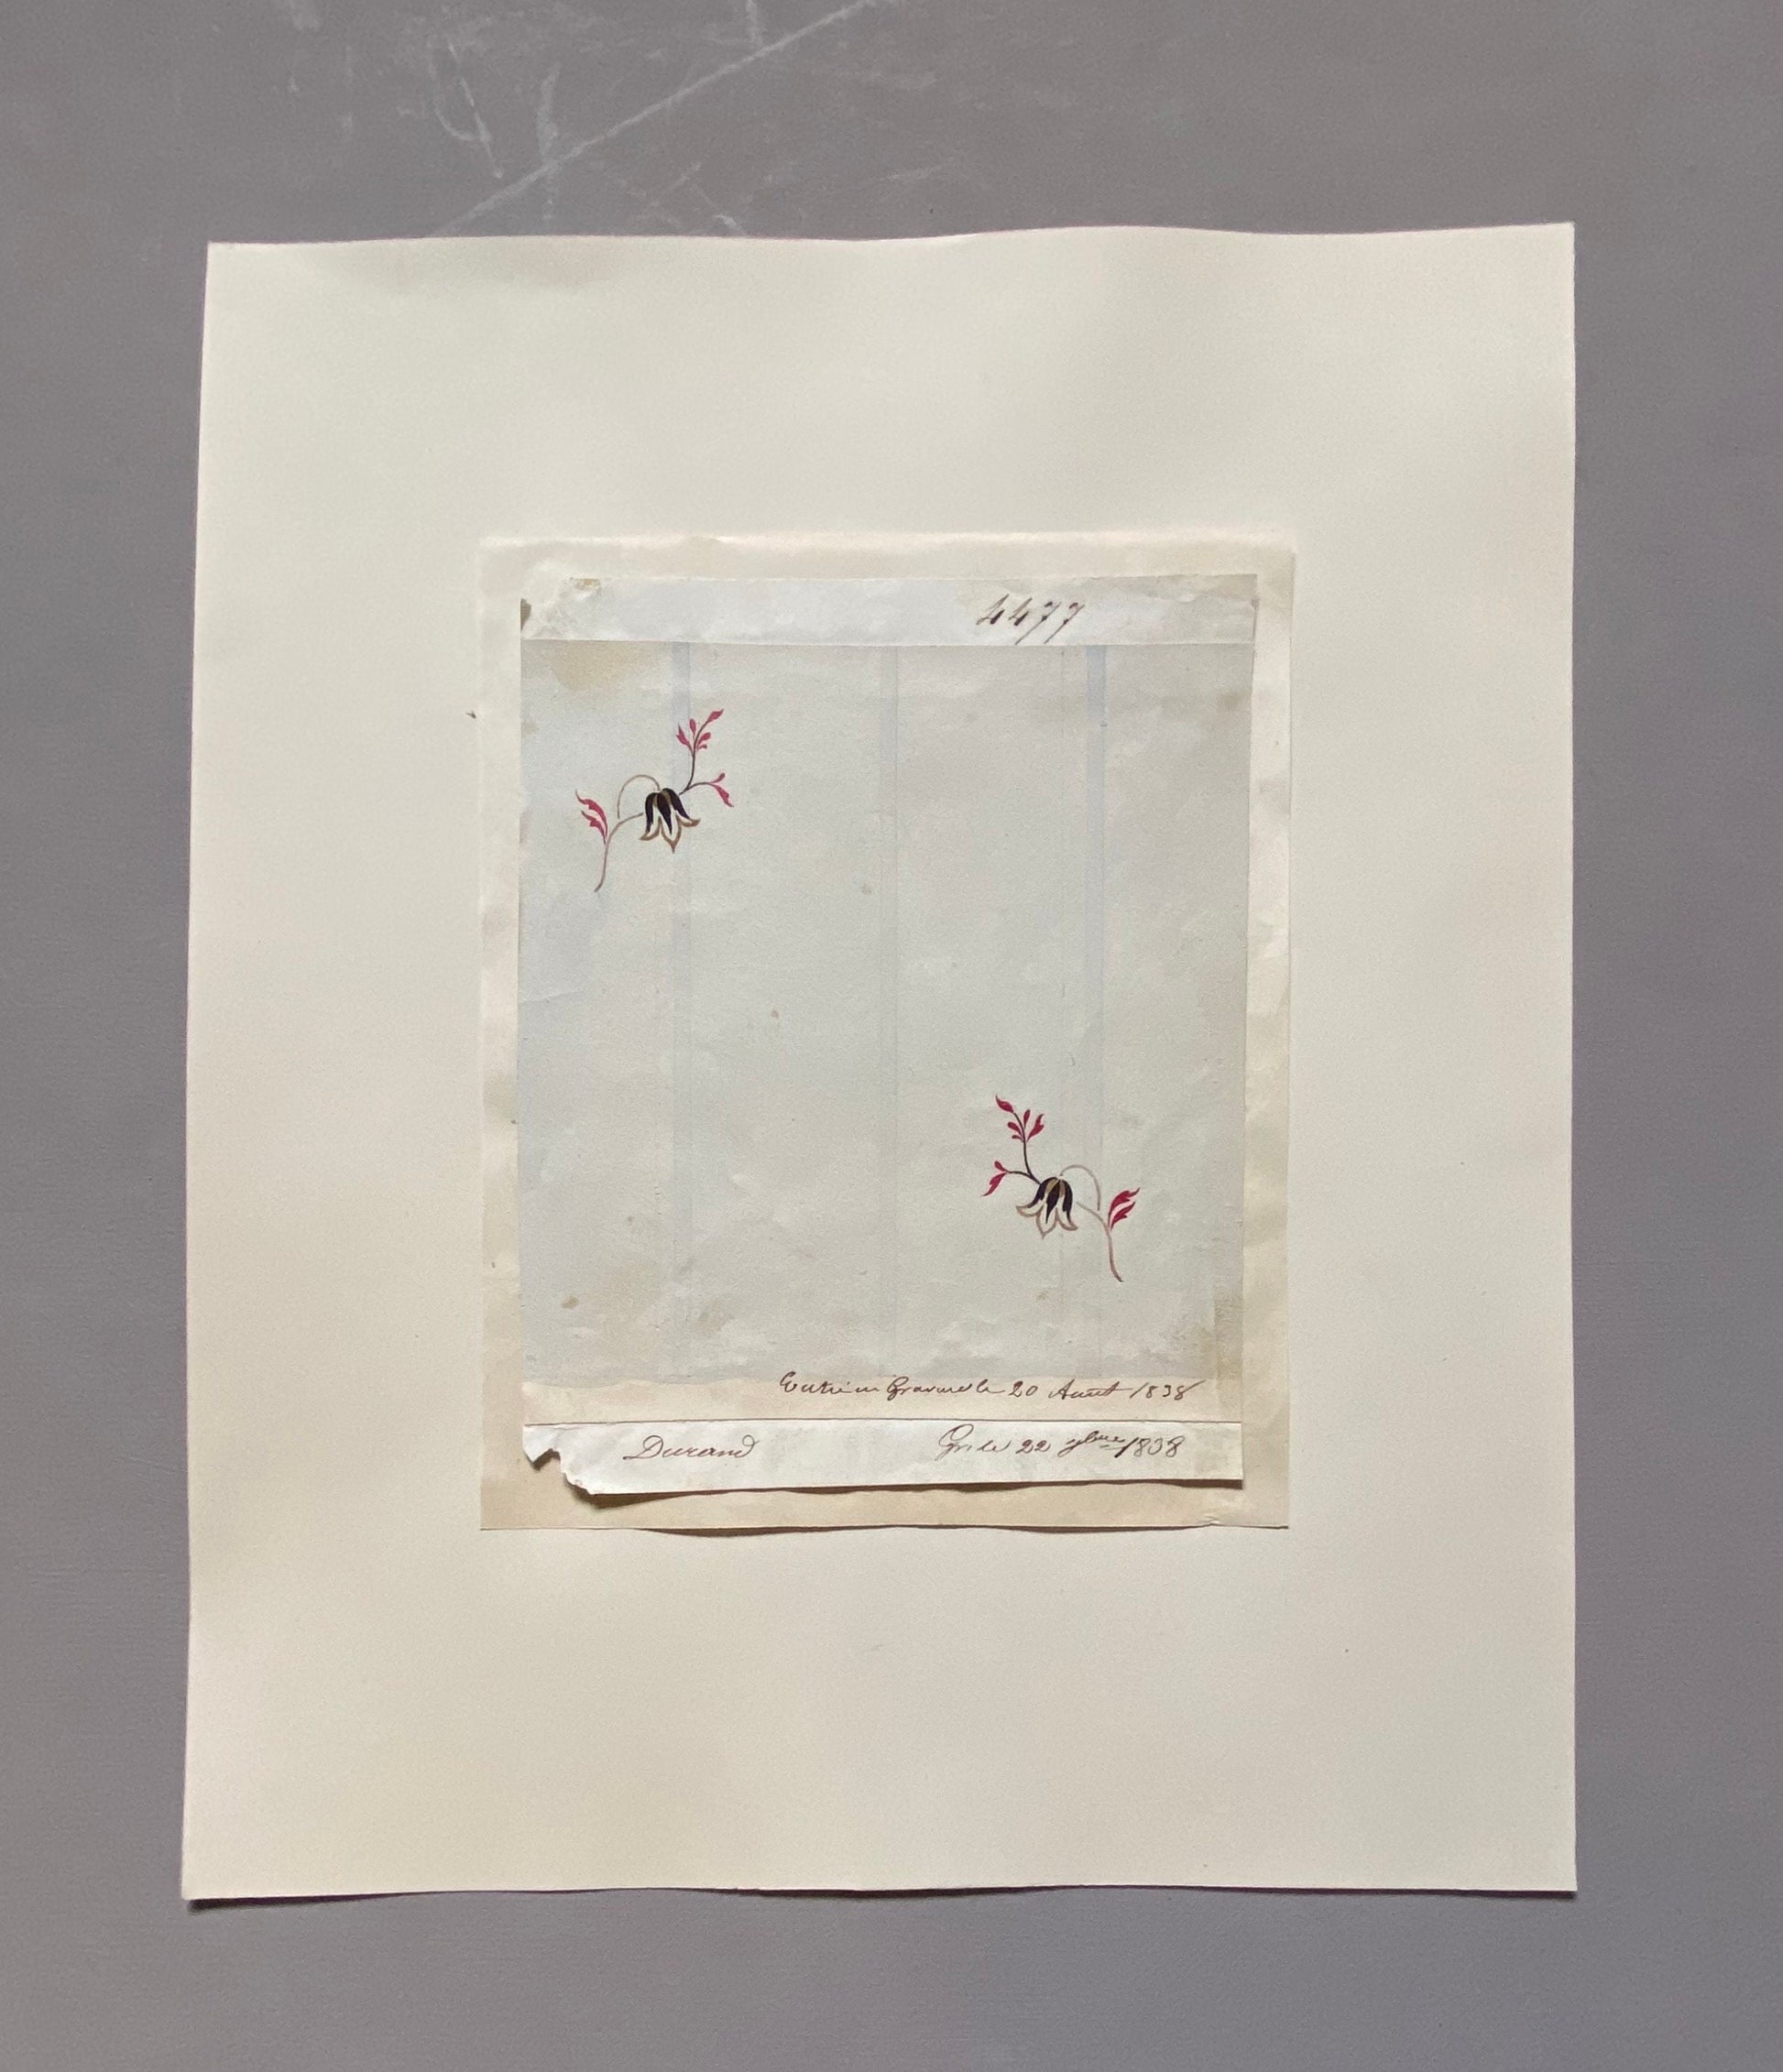 A Genuine 19th Century French Textile Design. Dated 1838. Mounted on Antique Paper. Size: 12.8 x 15.6 cms.